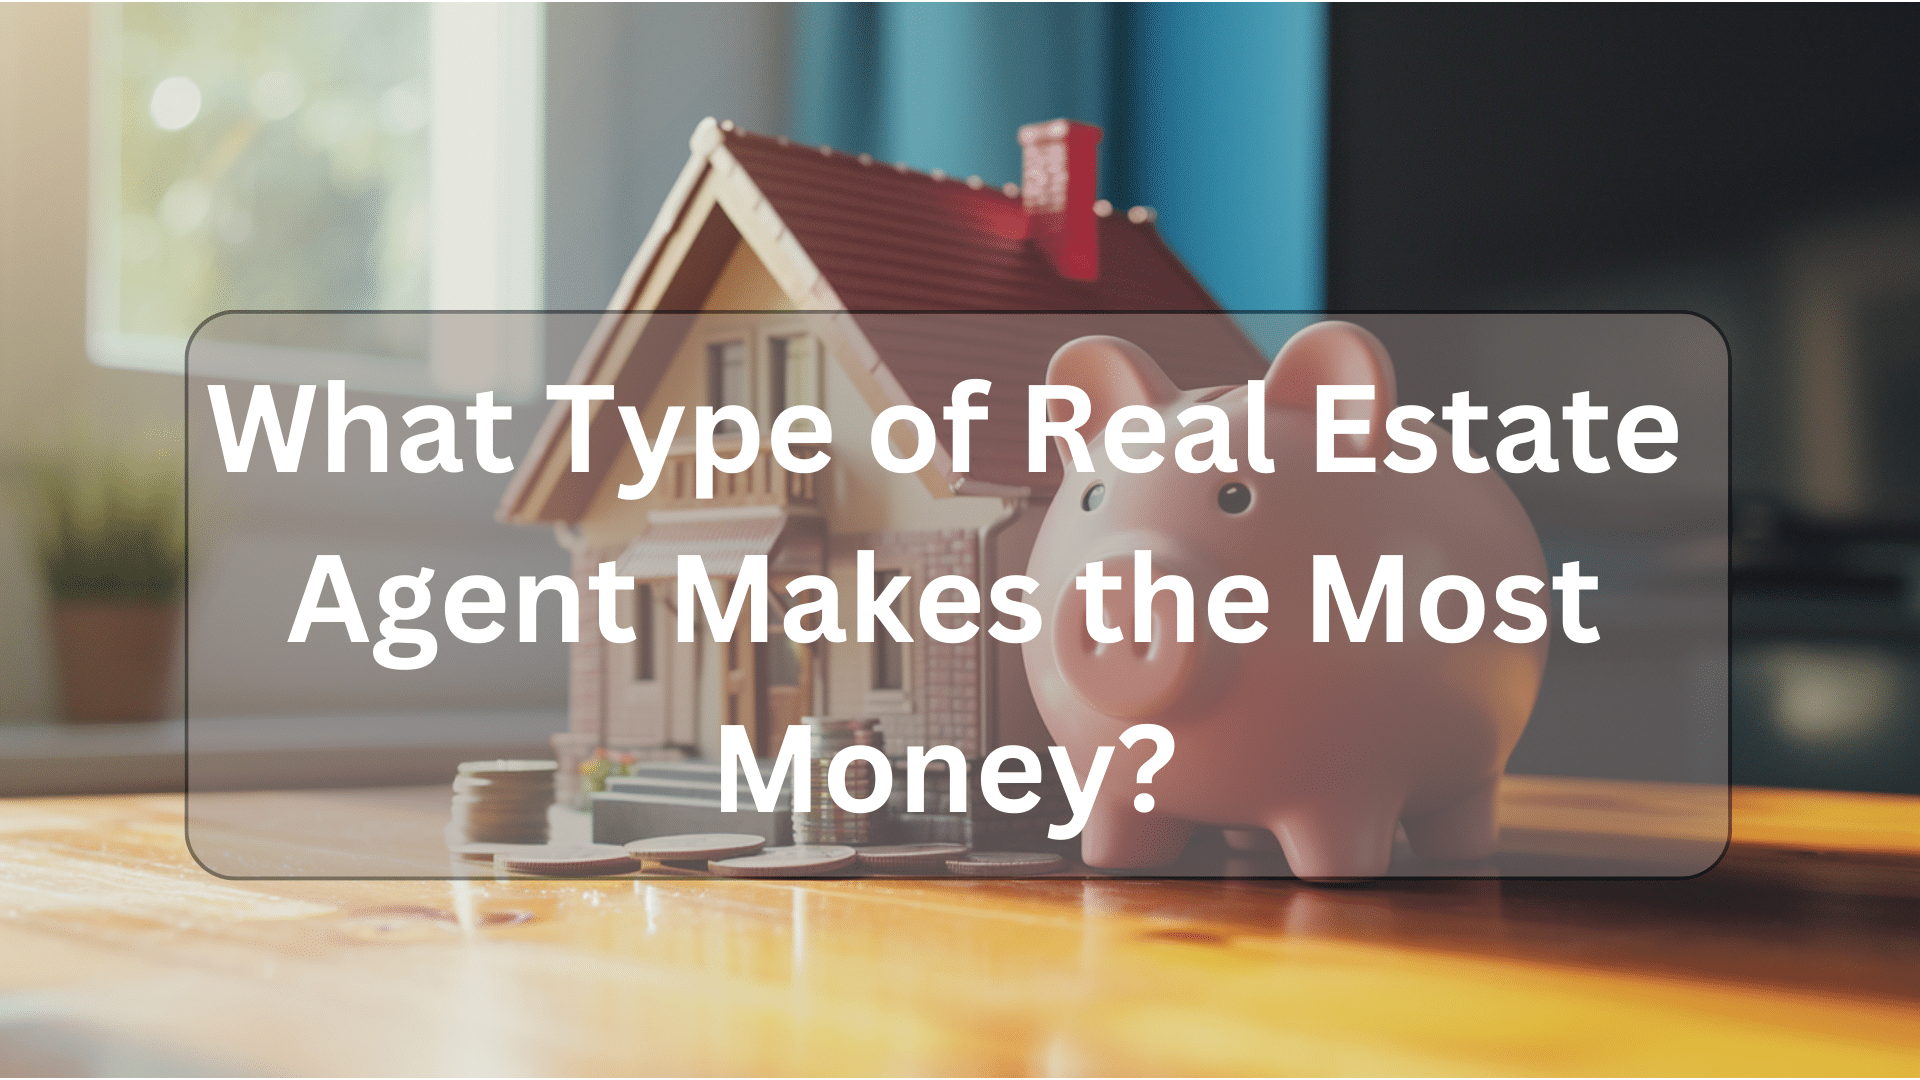 What type of real estate agent makes the most money illustration